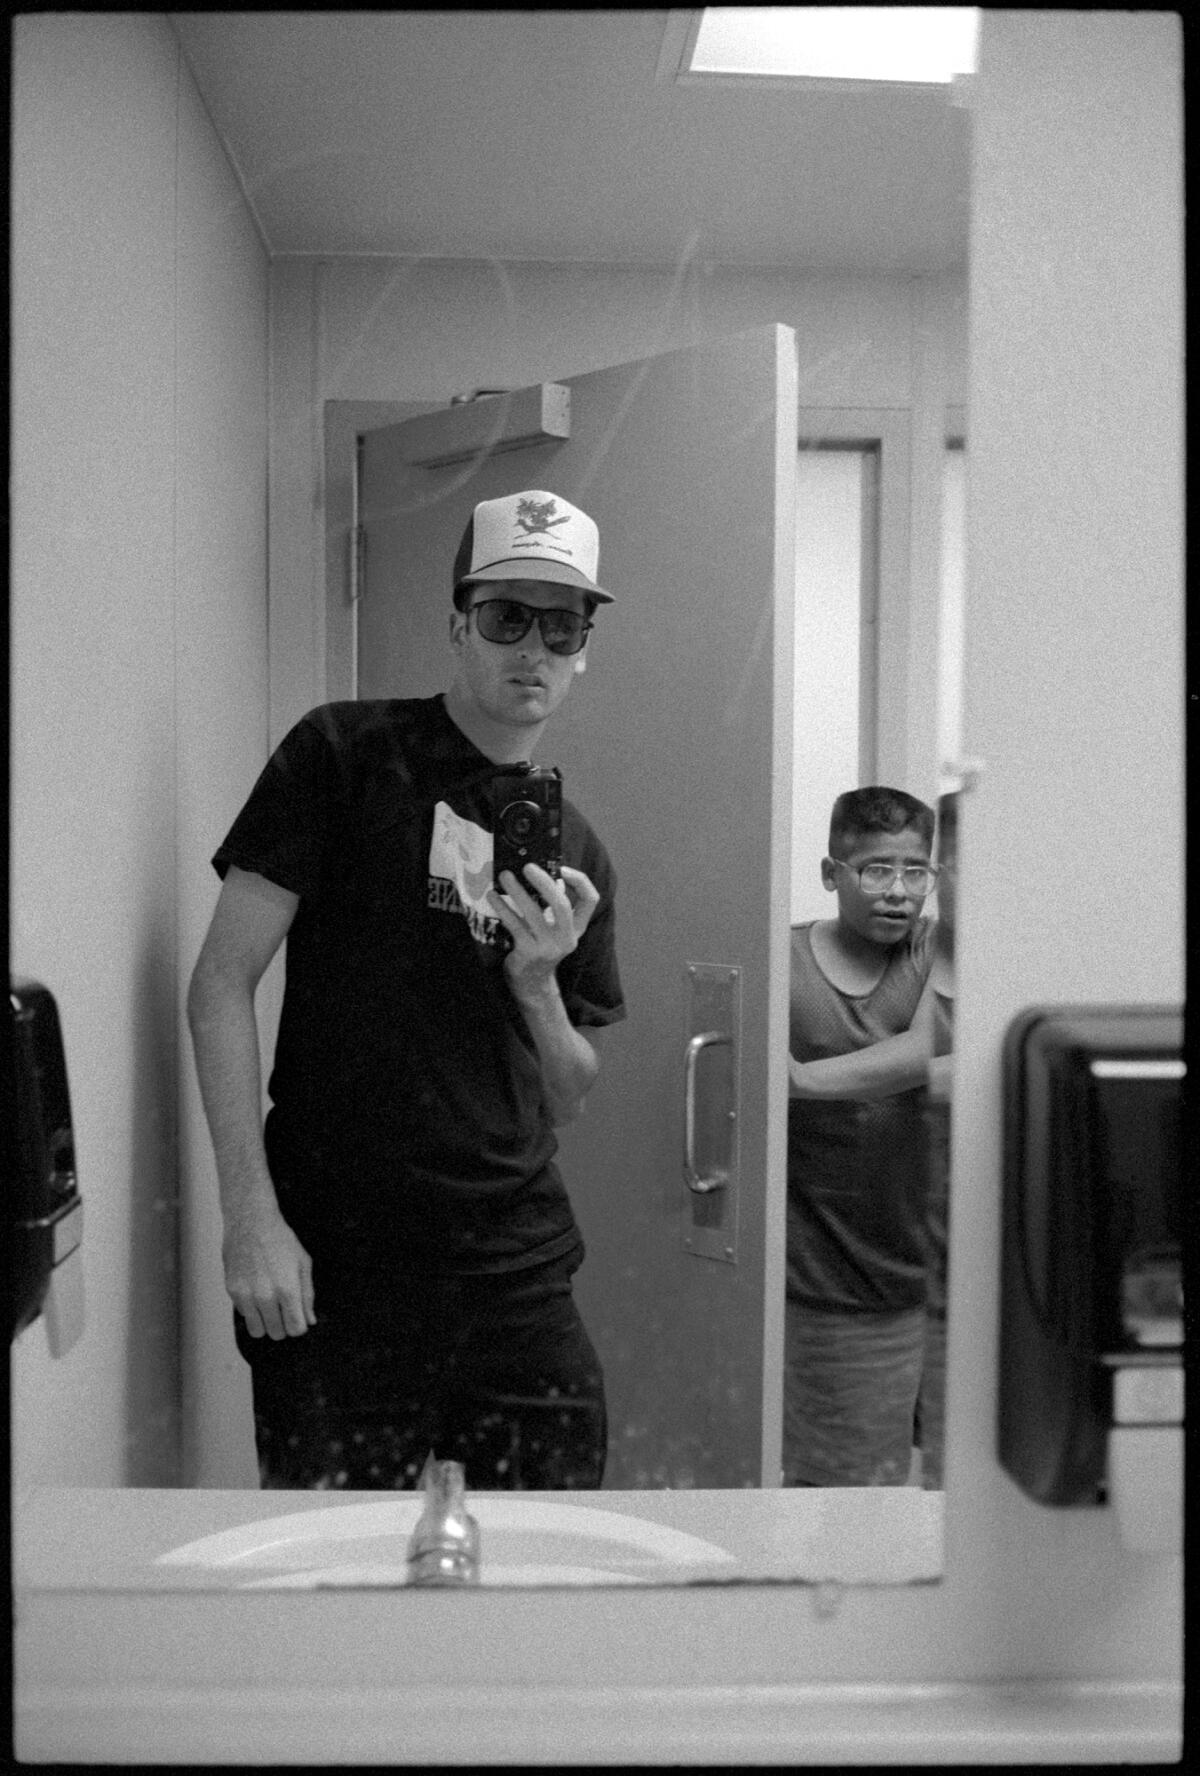 A young man in a baseball cap takes a selfie in a bathroom mirror as another person walks in.